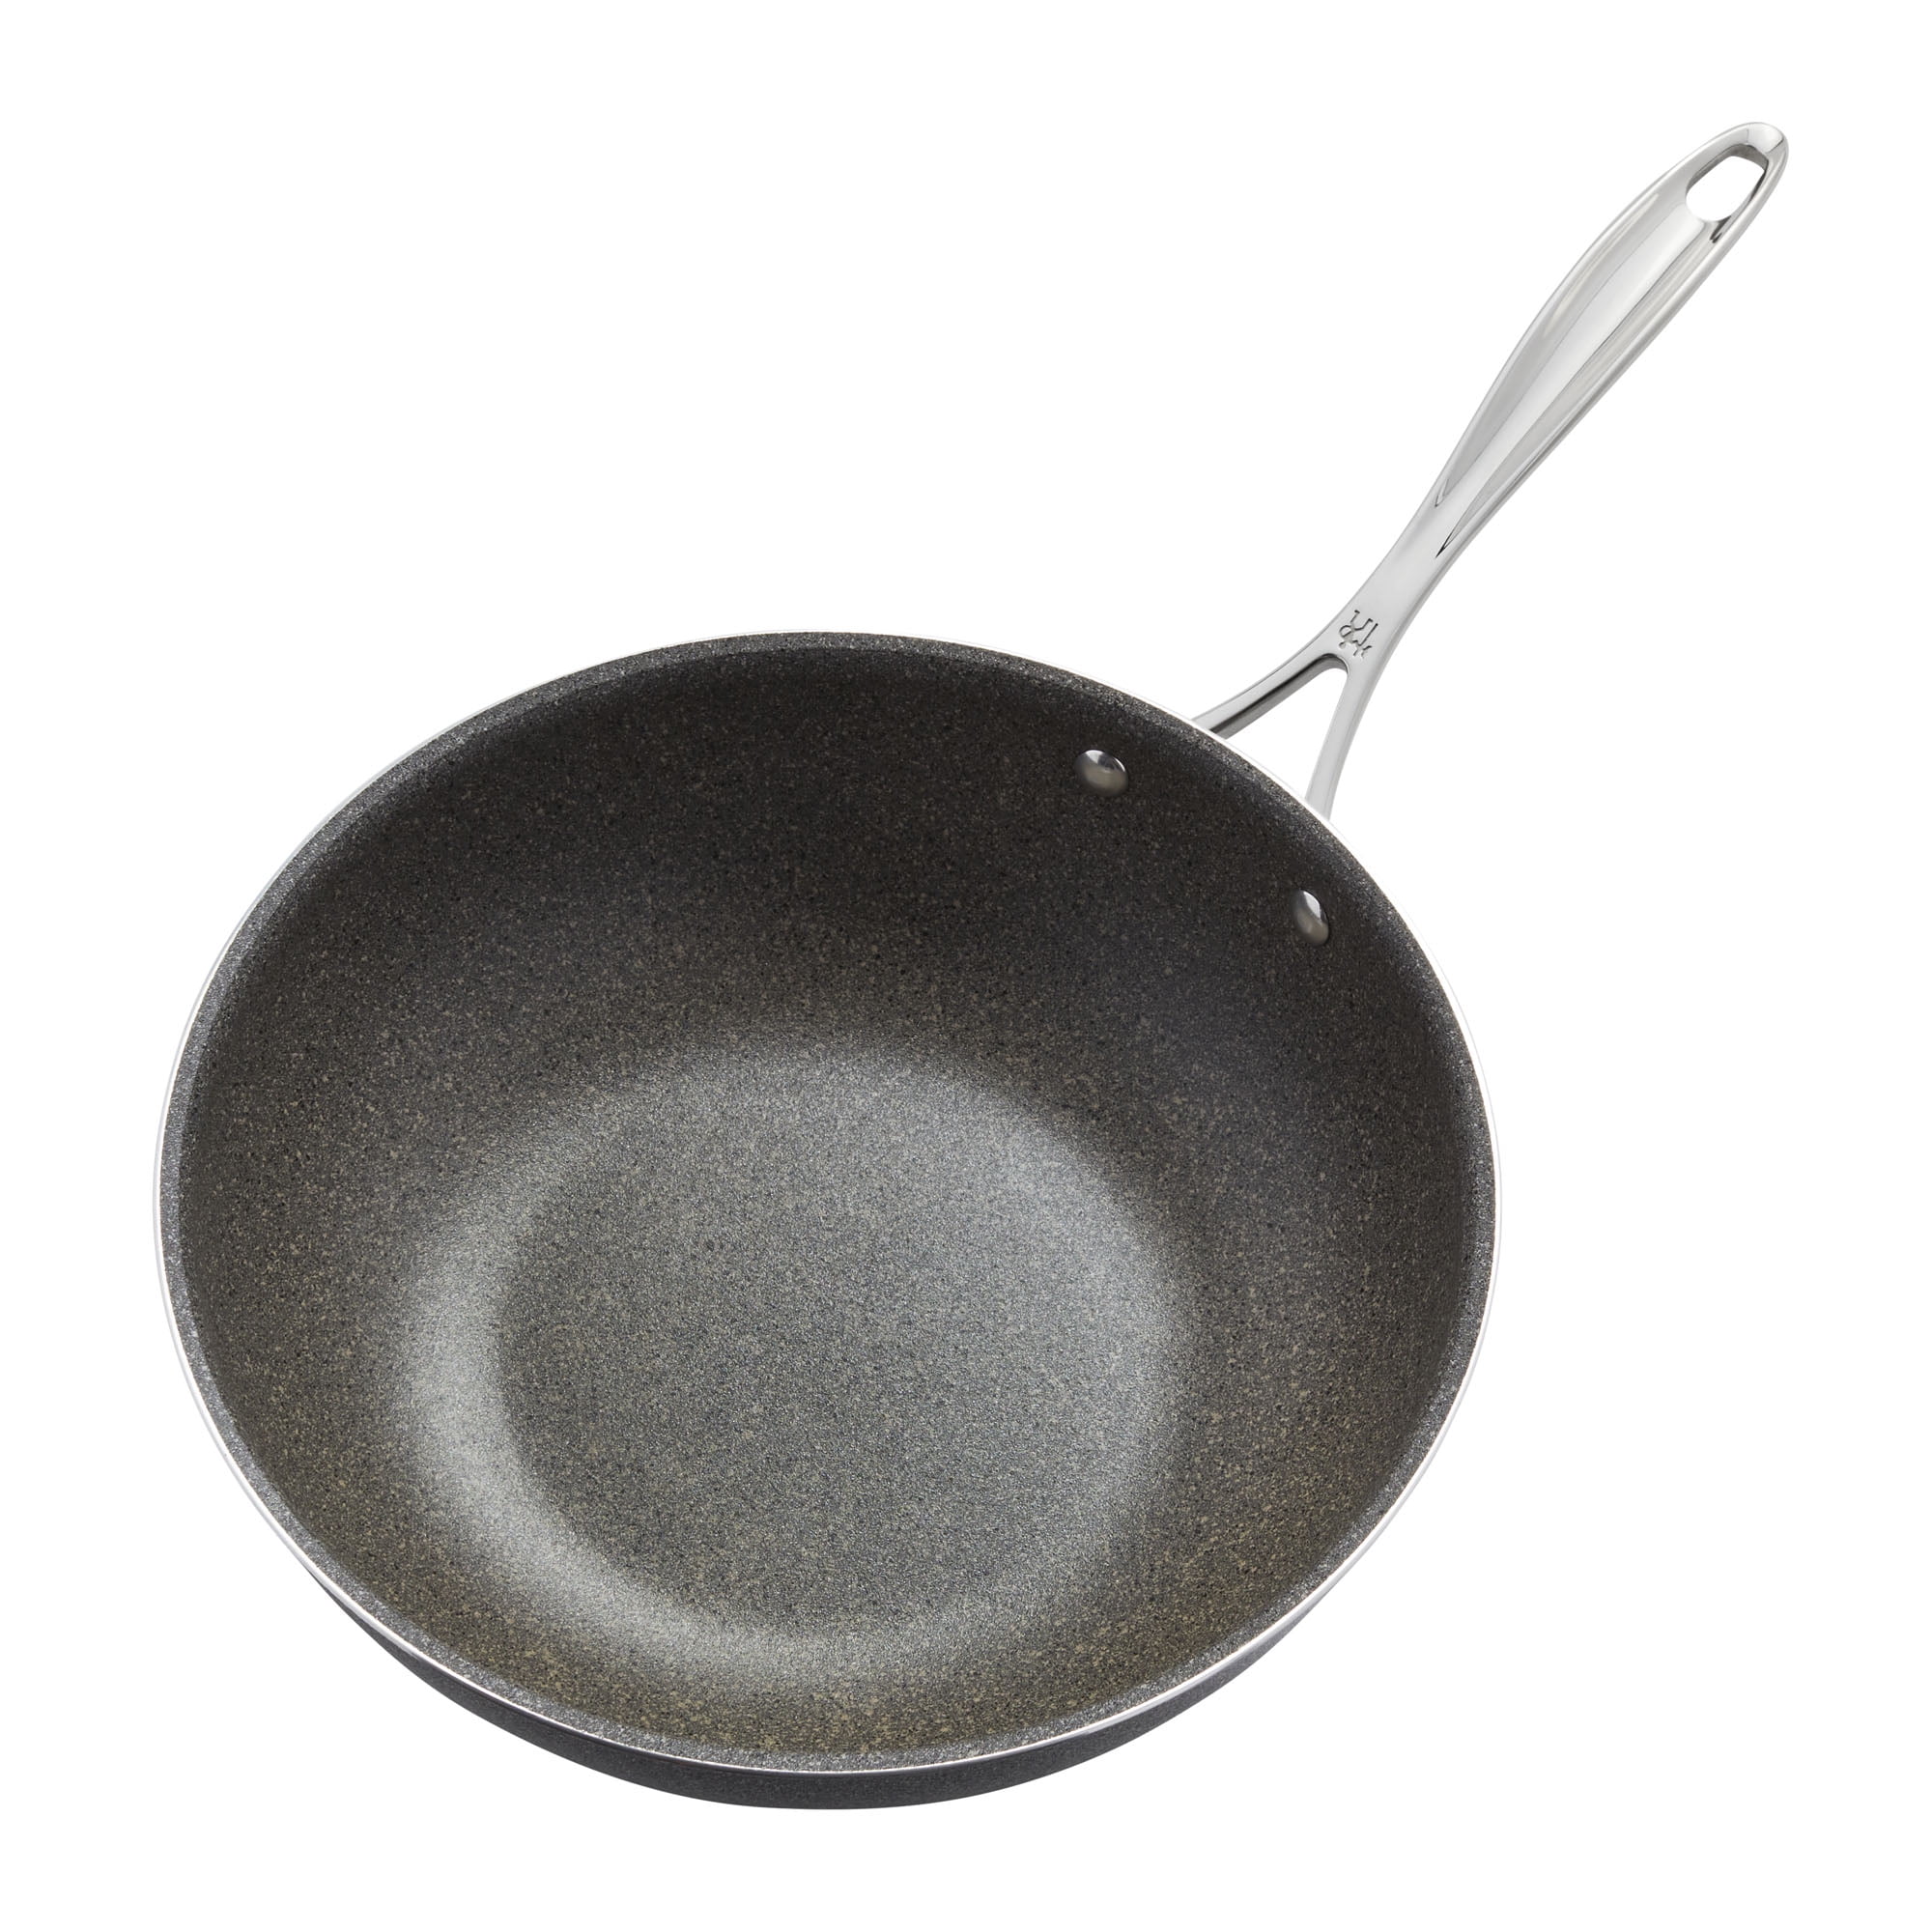 Henckels Everlift 8-inch Granitium Nonstick Frying Pan, Made in Italy,  durable 3-layer granite-hued nonstick coating from recycled materials, Oven